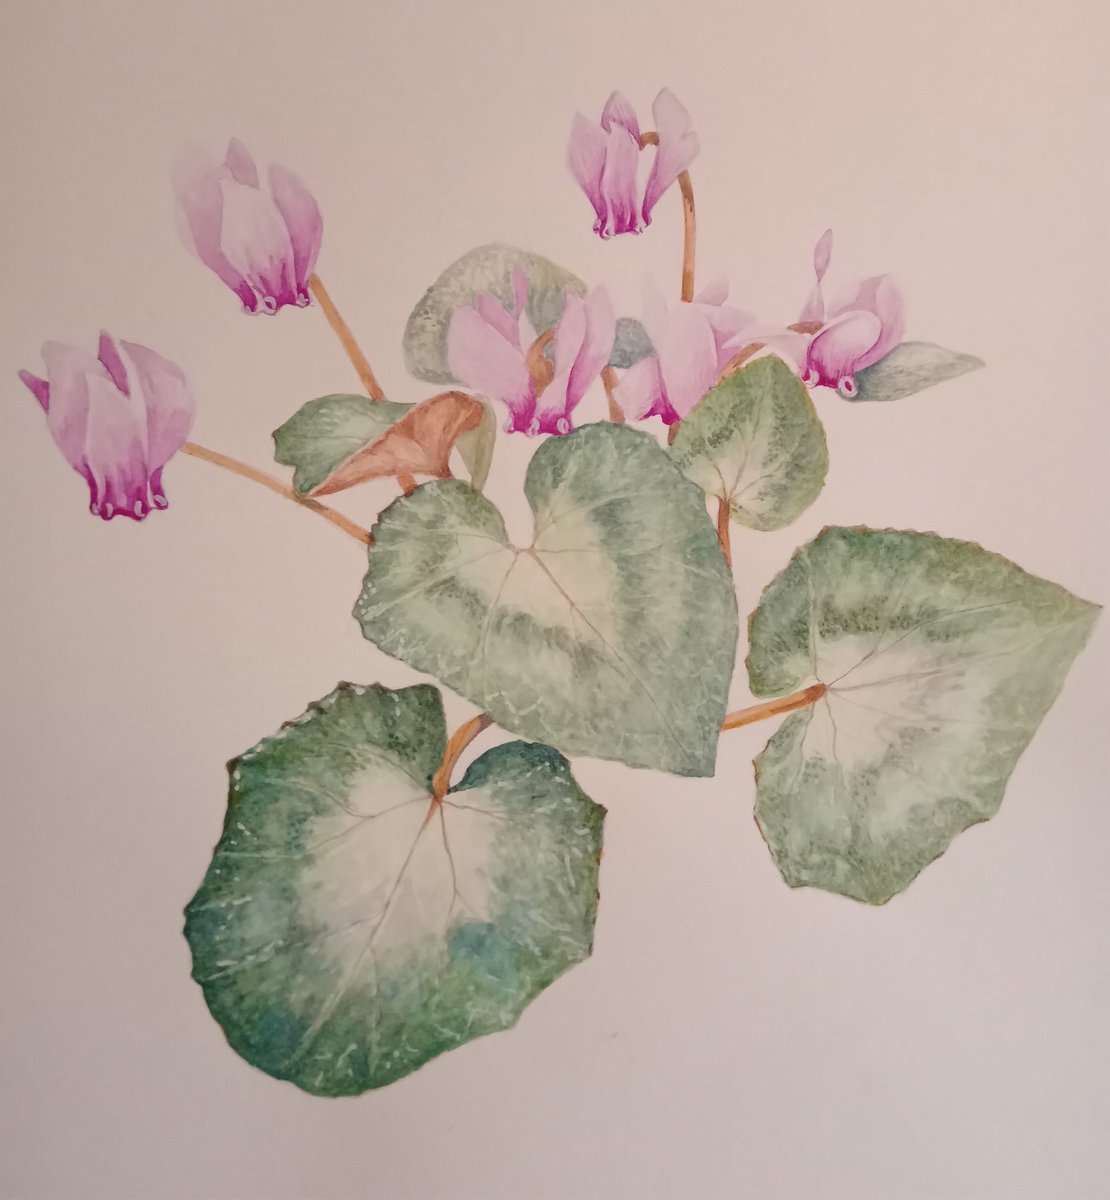 I am calling this one finished, just need to sign it, cut a mount and frame it Cyclamen Hederifolium crassifolium